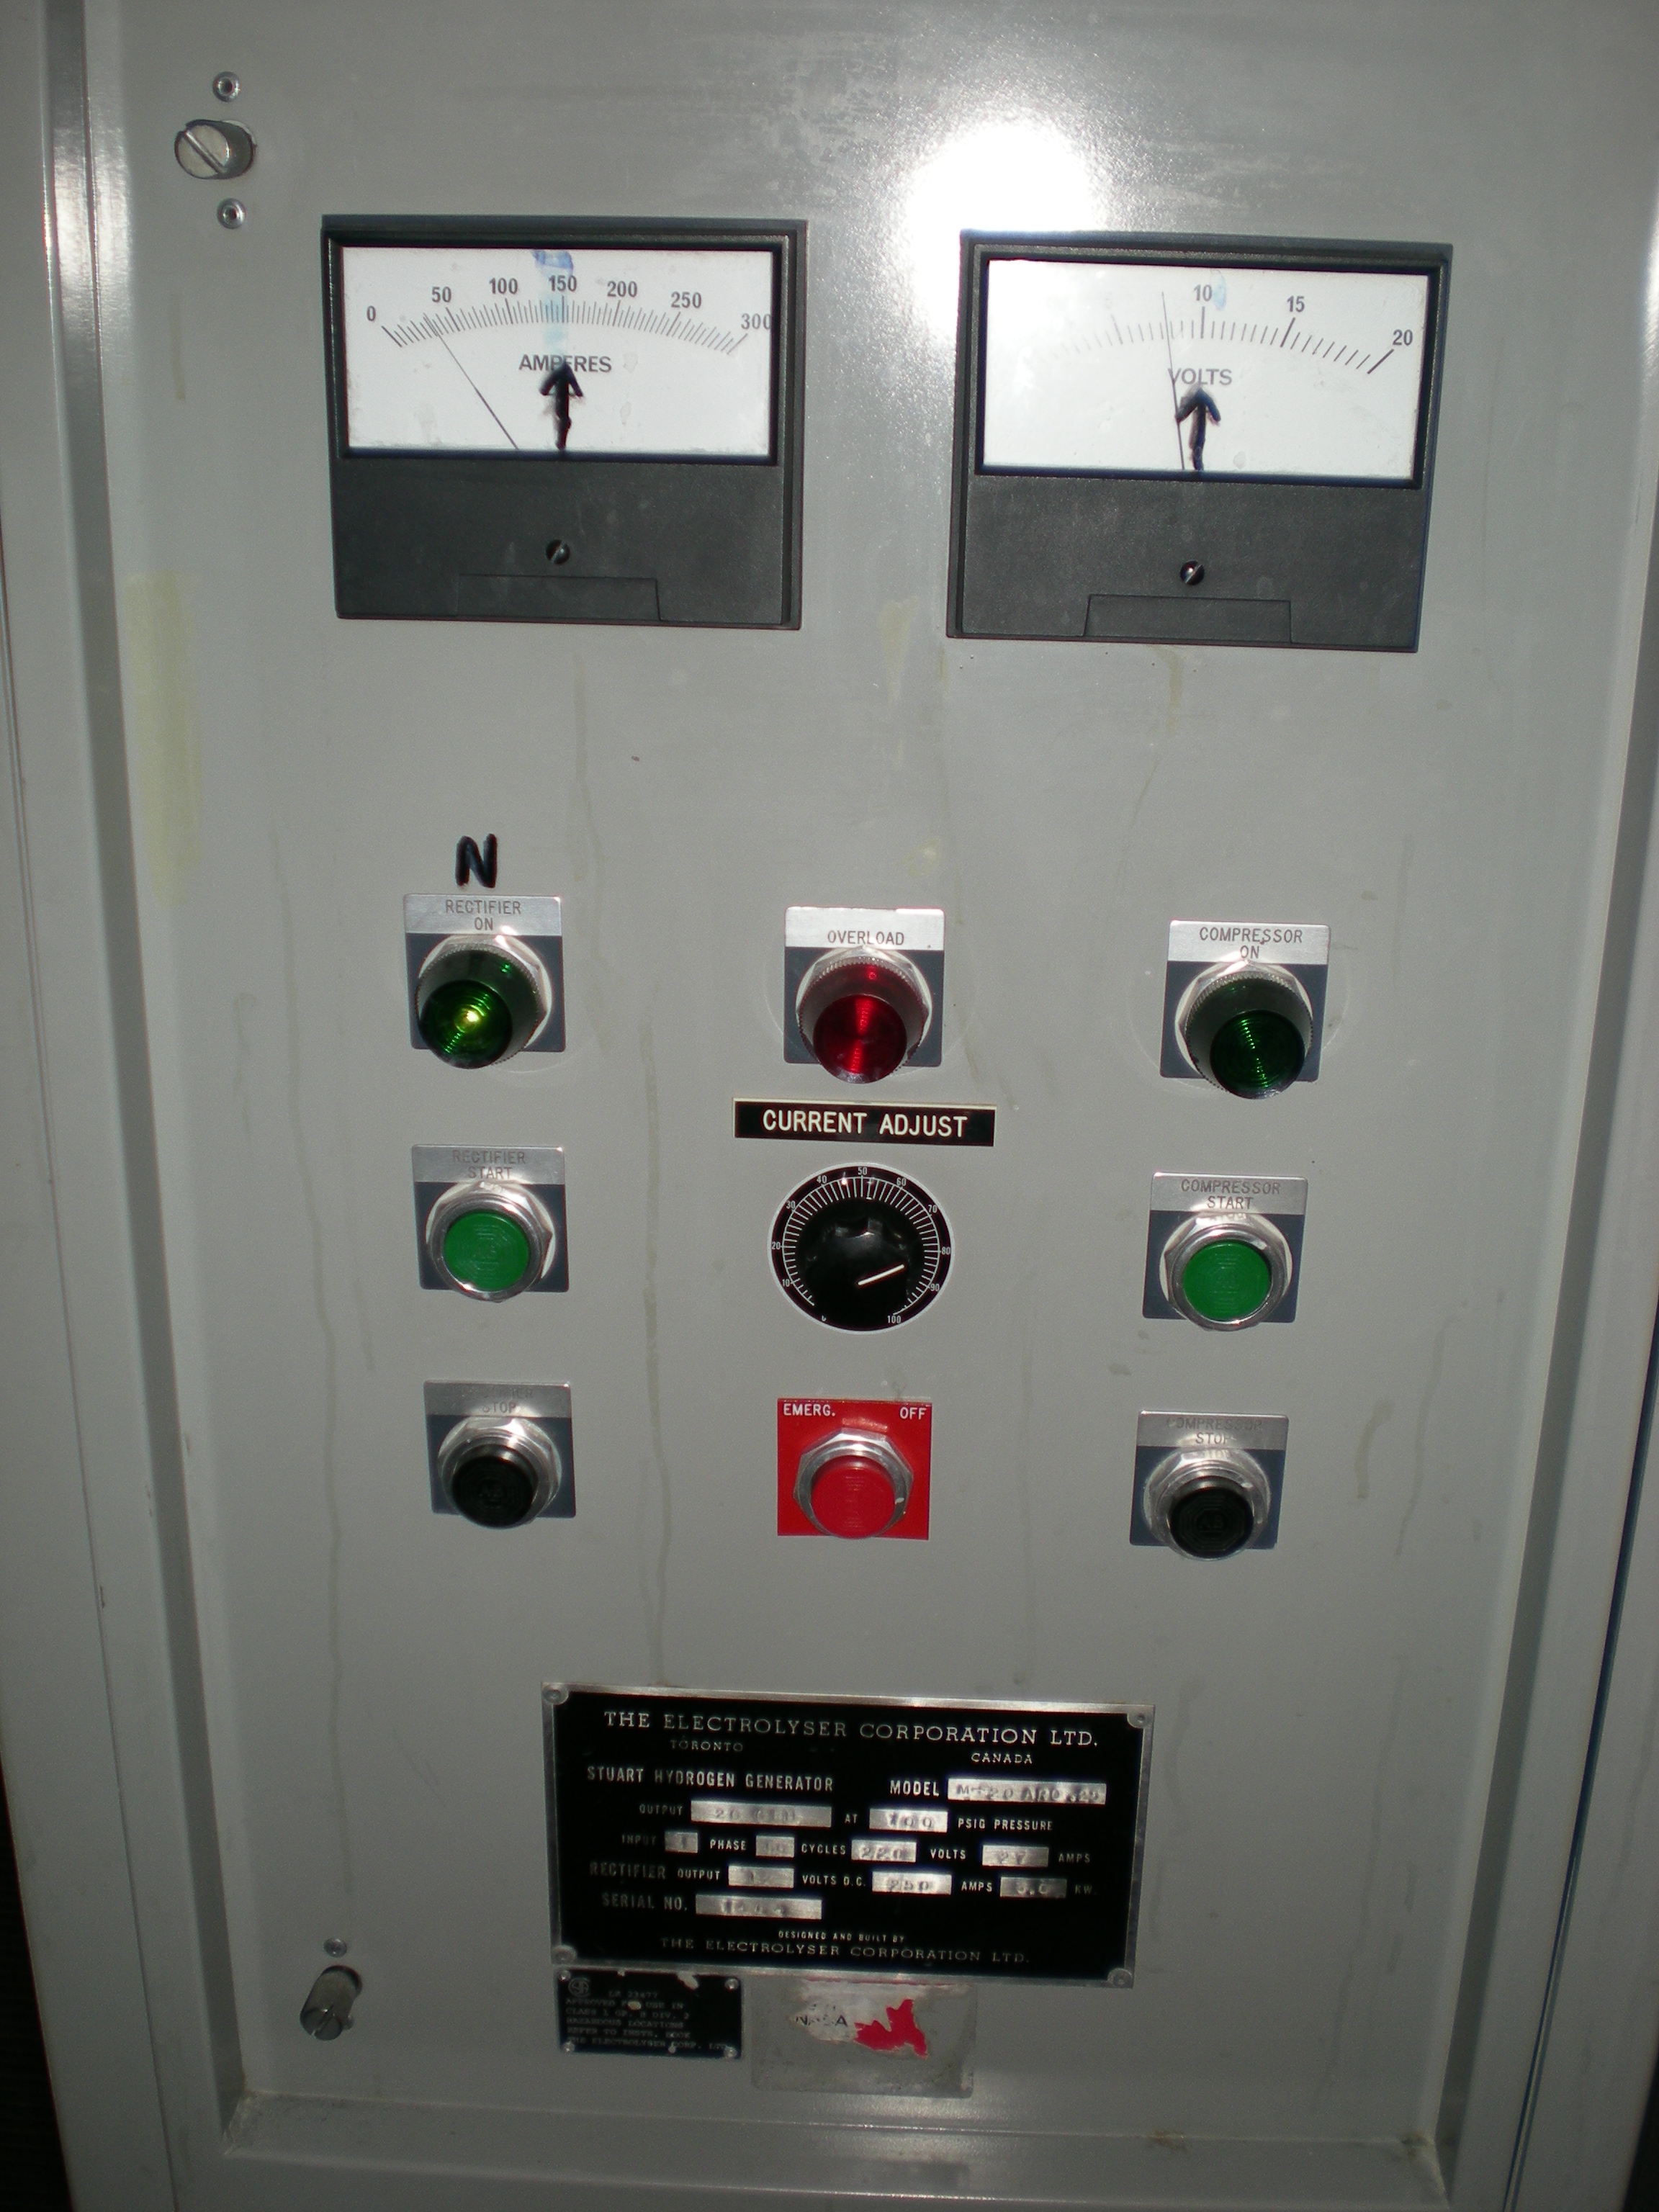 electrical panel dimensions